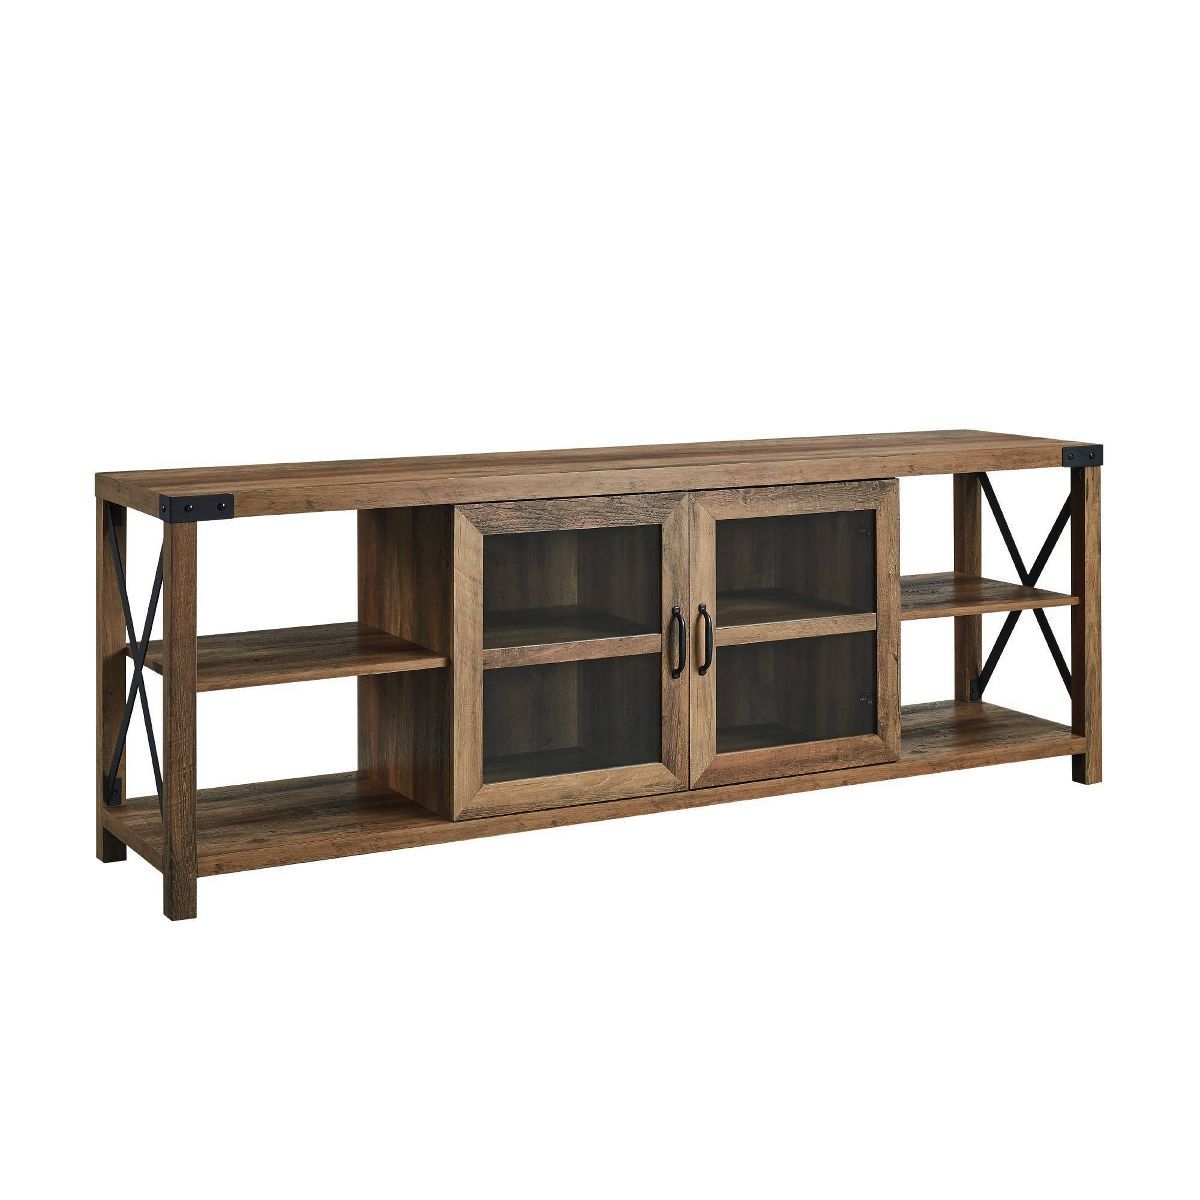 Sophie Rustic Farmhouse X Frame Glass Doors TV Stand for TVs up to 80" Rustic Oak - Saracina Home | Target